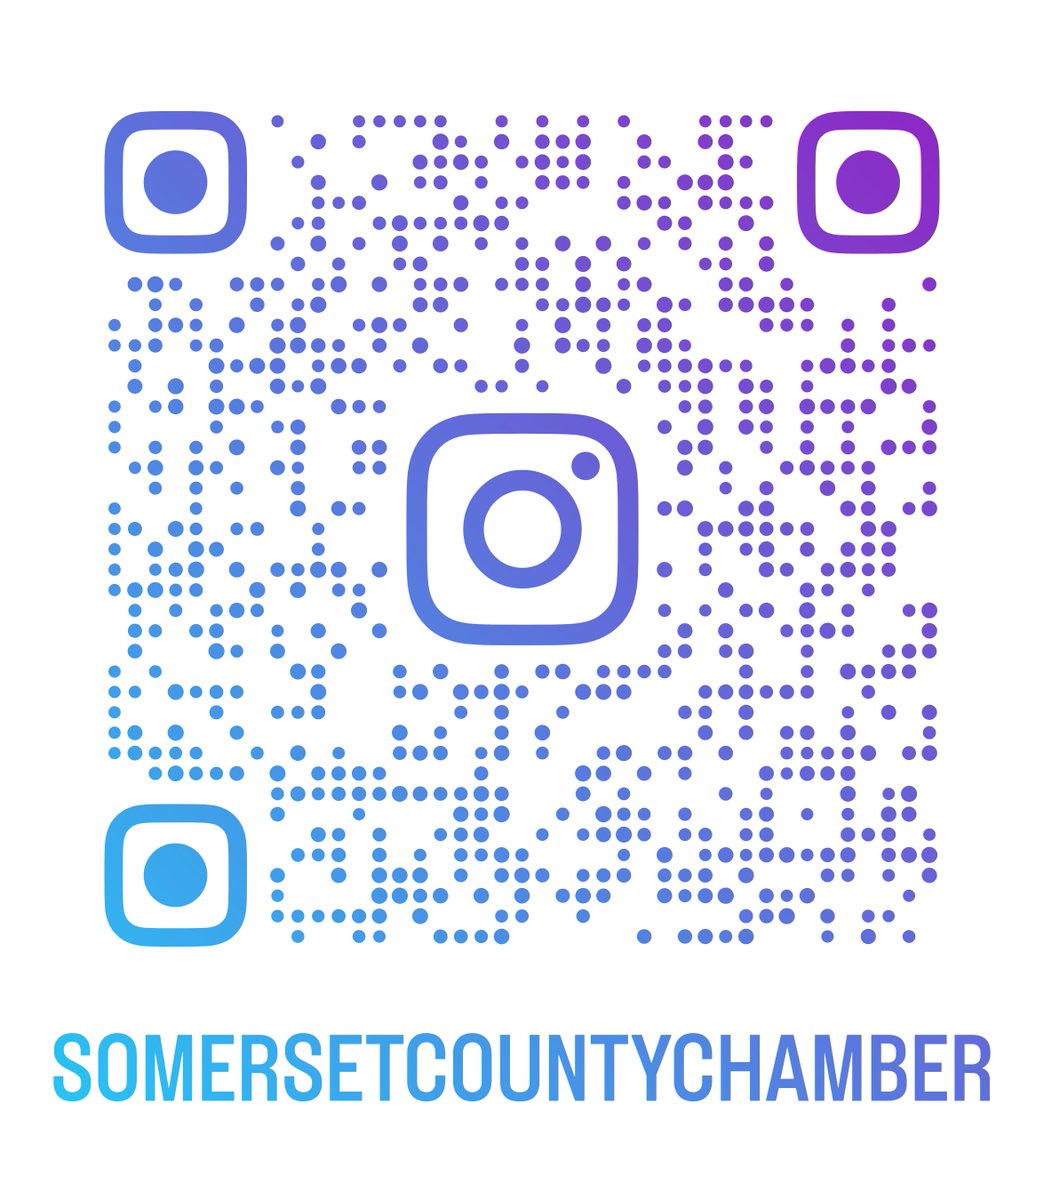 Exciting Announcement! The SoCo Chamber of Commerce is officially now on Instagram! Follow us @somersetcountychamber instagram.com/somersetcounty… to stay updated on all things Somerset County & chamber-related. From exciting events to valuable resources, we've got you covered.